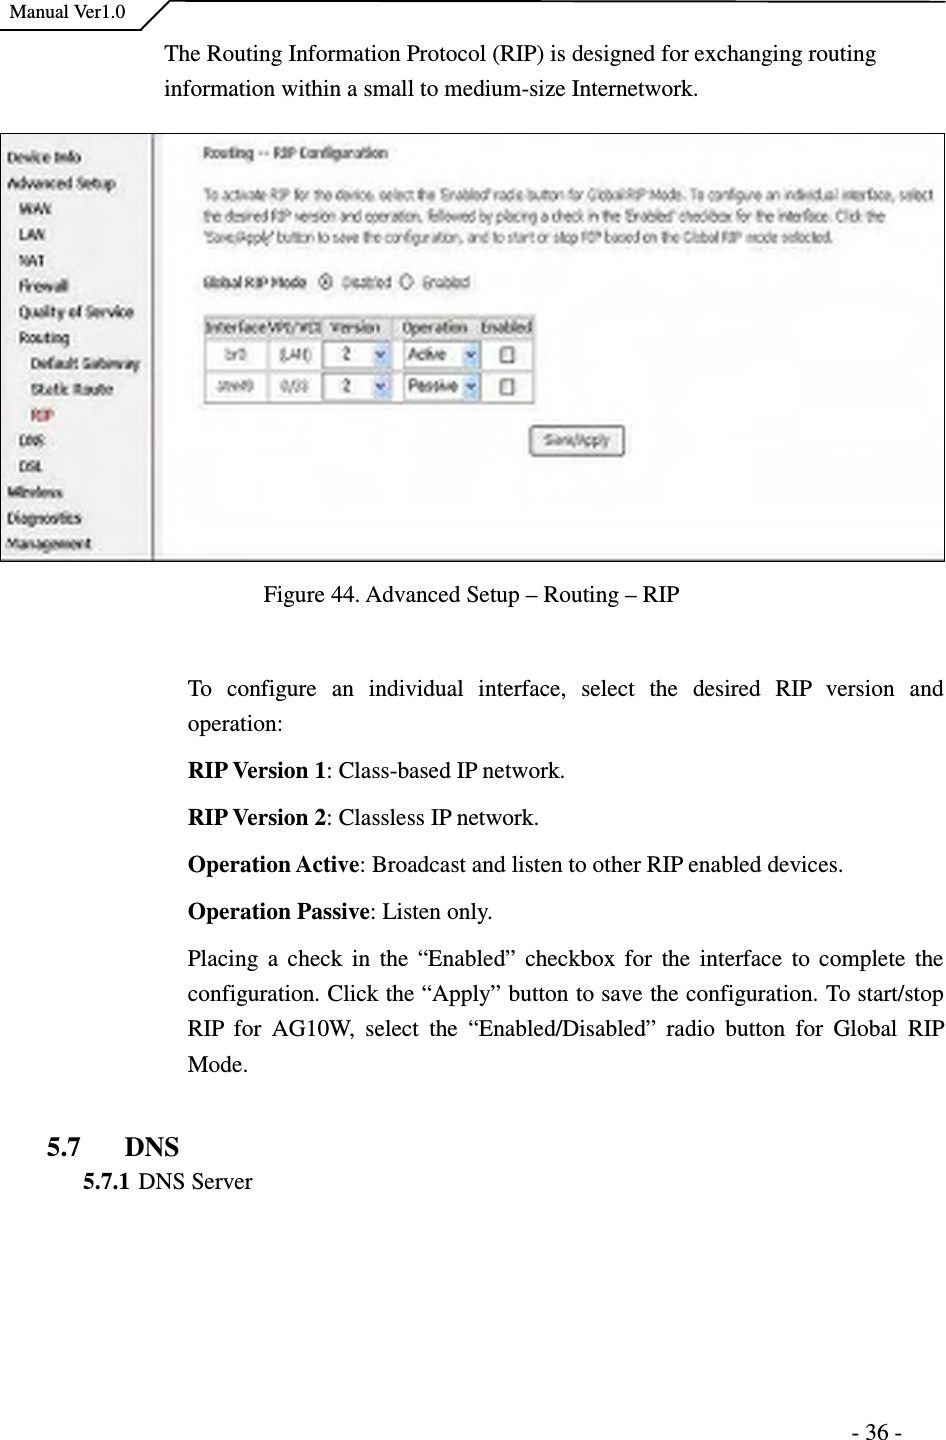    Manual Ver1.0                                                                      - 36 - The Routing Information Protocol (RIP) is designed for exchanging routing information within a small to medium-size Internetwork.   Figure 44. Advanced Setup – Routing – RIP  To  configure  an  individual  interface,  select  the  desired  RIP  version  and operation: RIP Version 1: Class-based IP network. RIP Version 2: Classless IP network.   Operation Active: Broadcast and listen to other RIP enabled devices. Operation Passive: Listen only. Placing  a  check  in the  “Enabled”  checkbox for  the interface  to complete  the configuration. Click the “Apply” button to save the configuration. To start/stop RIP  for  AG10W,  select  the  “Enabled/Disabled”  radio  button  for  Global  RIP Mode.    5.7 DNS 5.7.1 DNS Server  